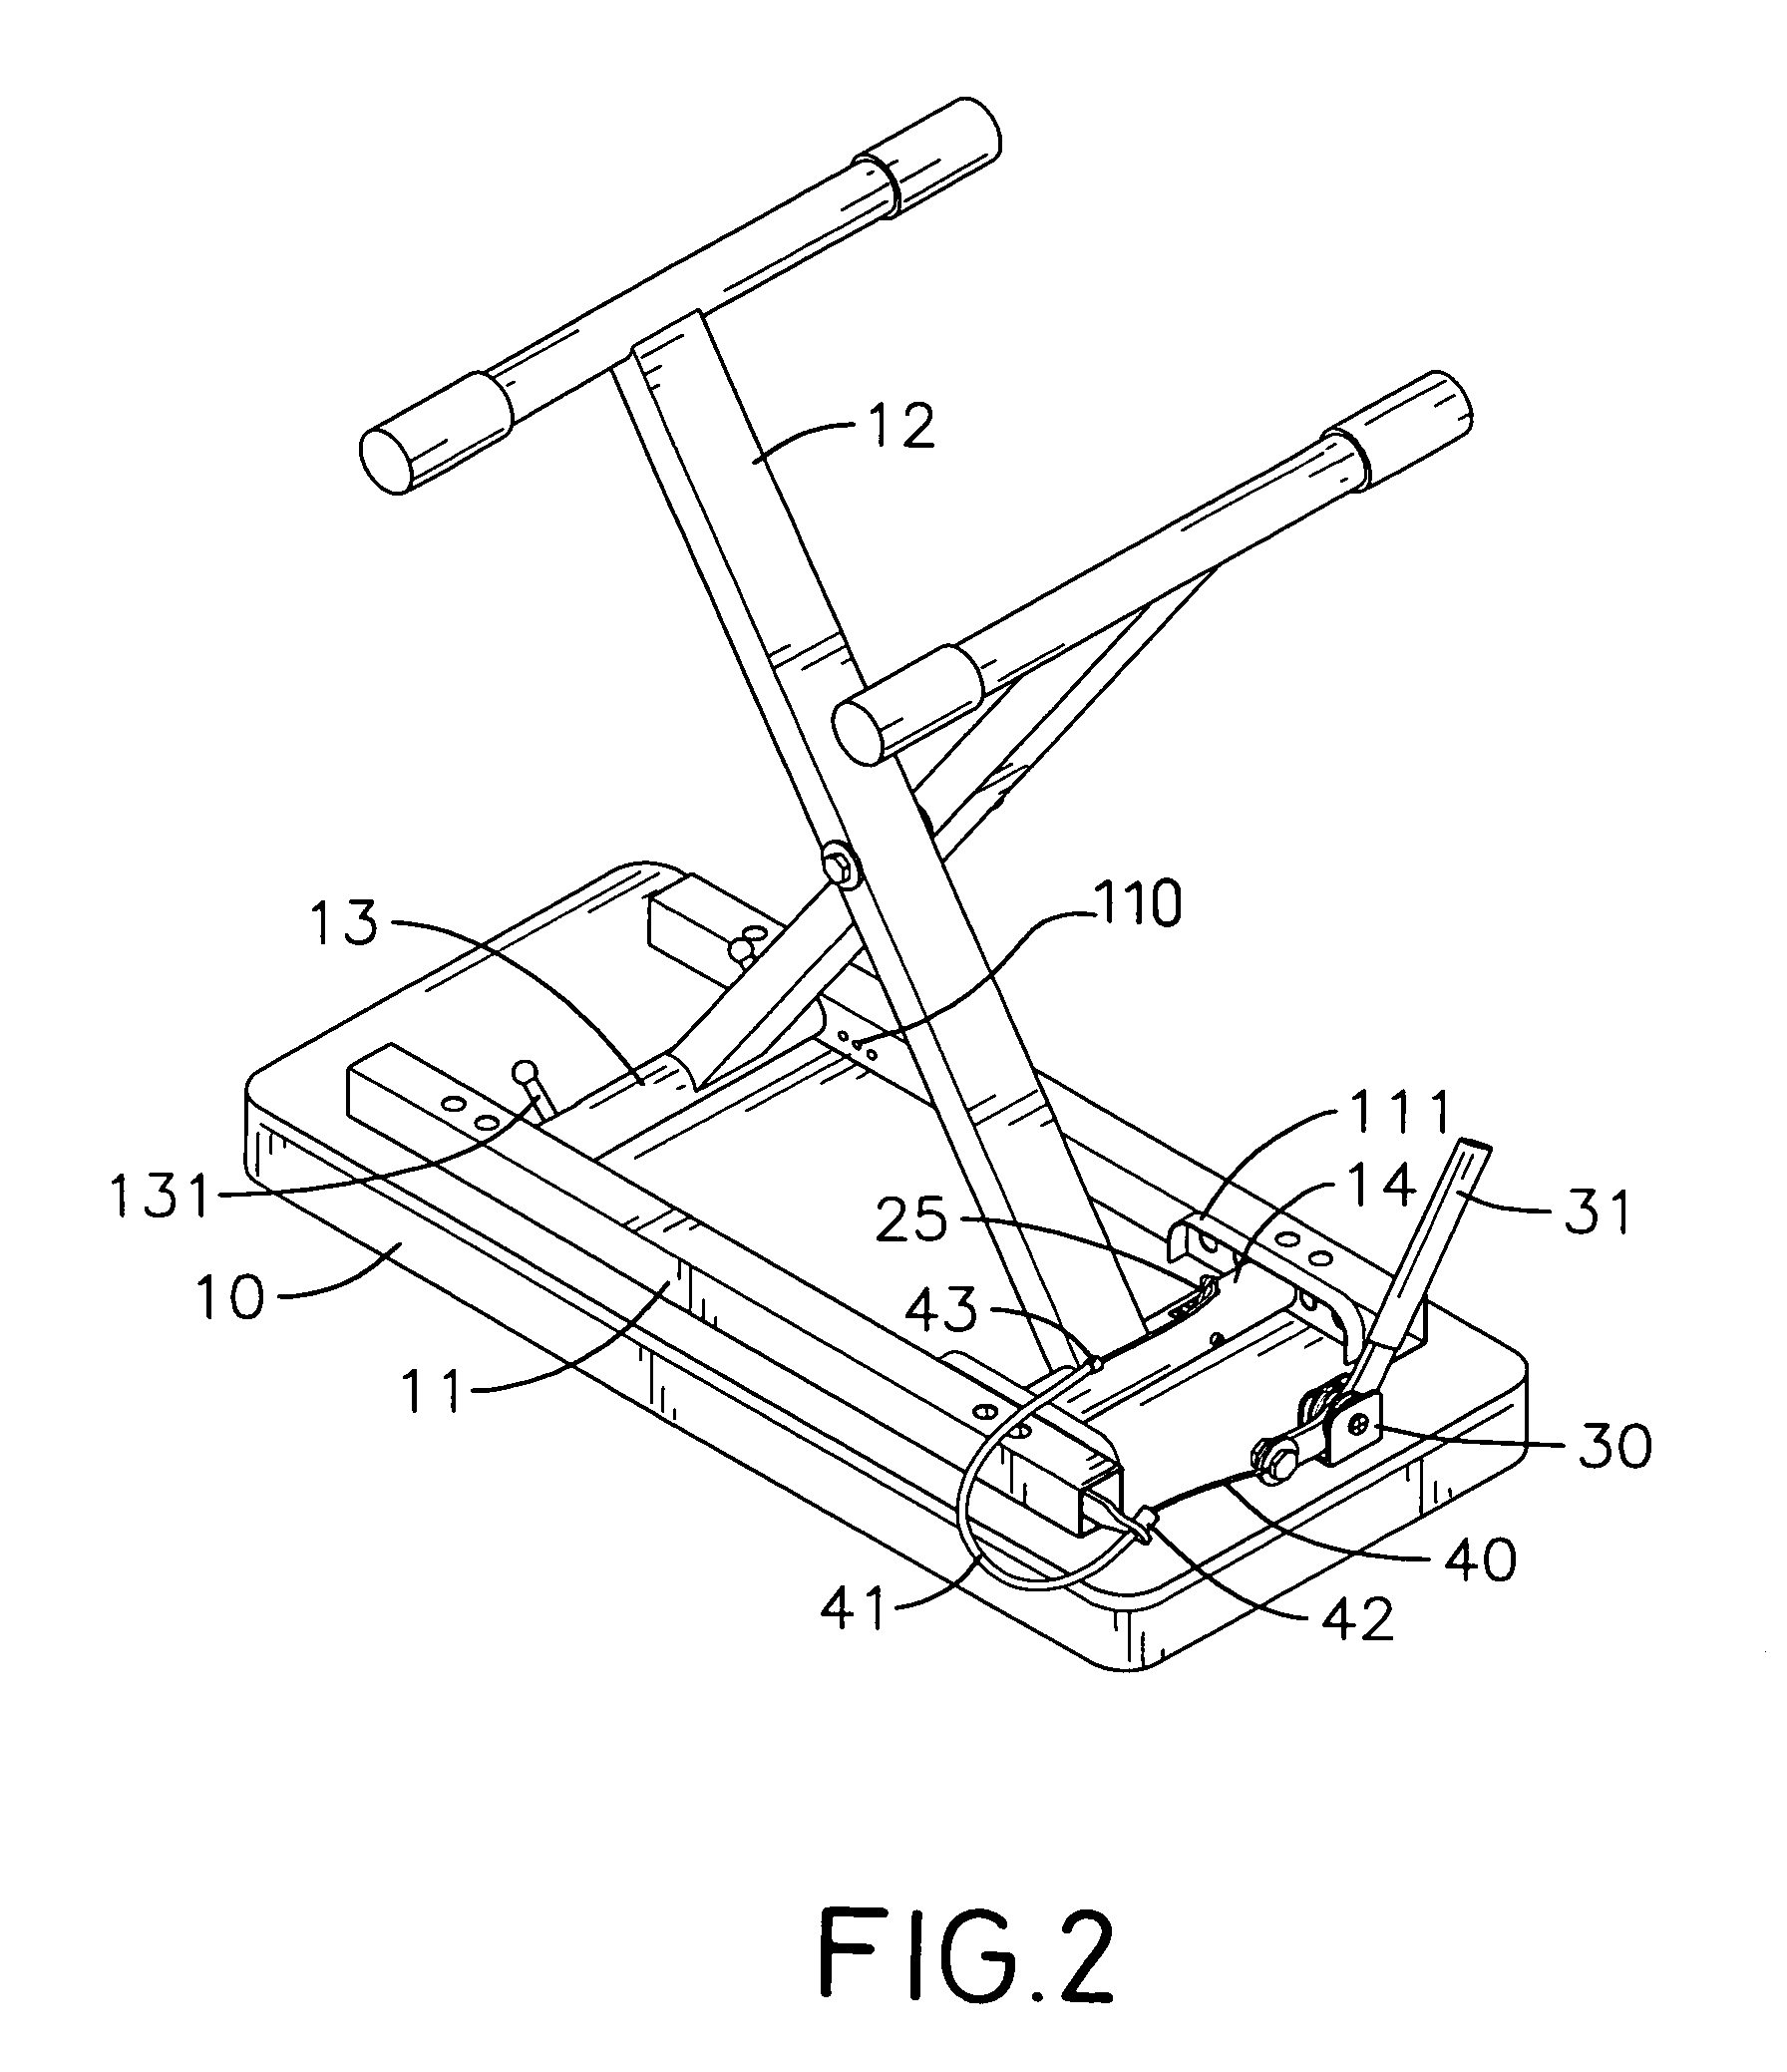 Height adjustable chair for a keyboard instrument